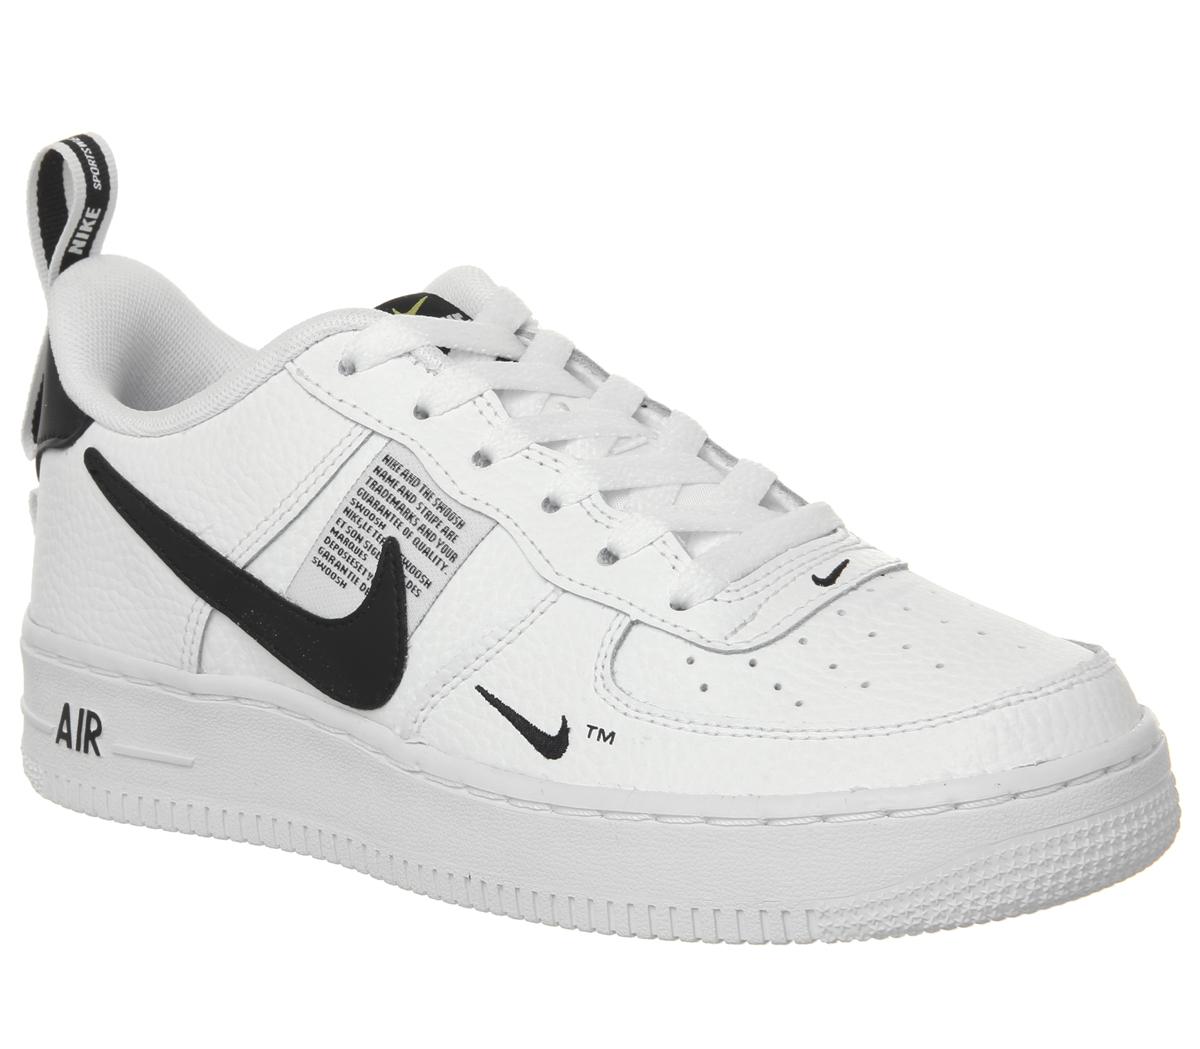 the new nike air force 1 lv8